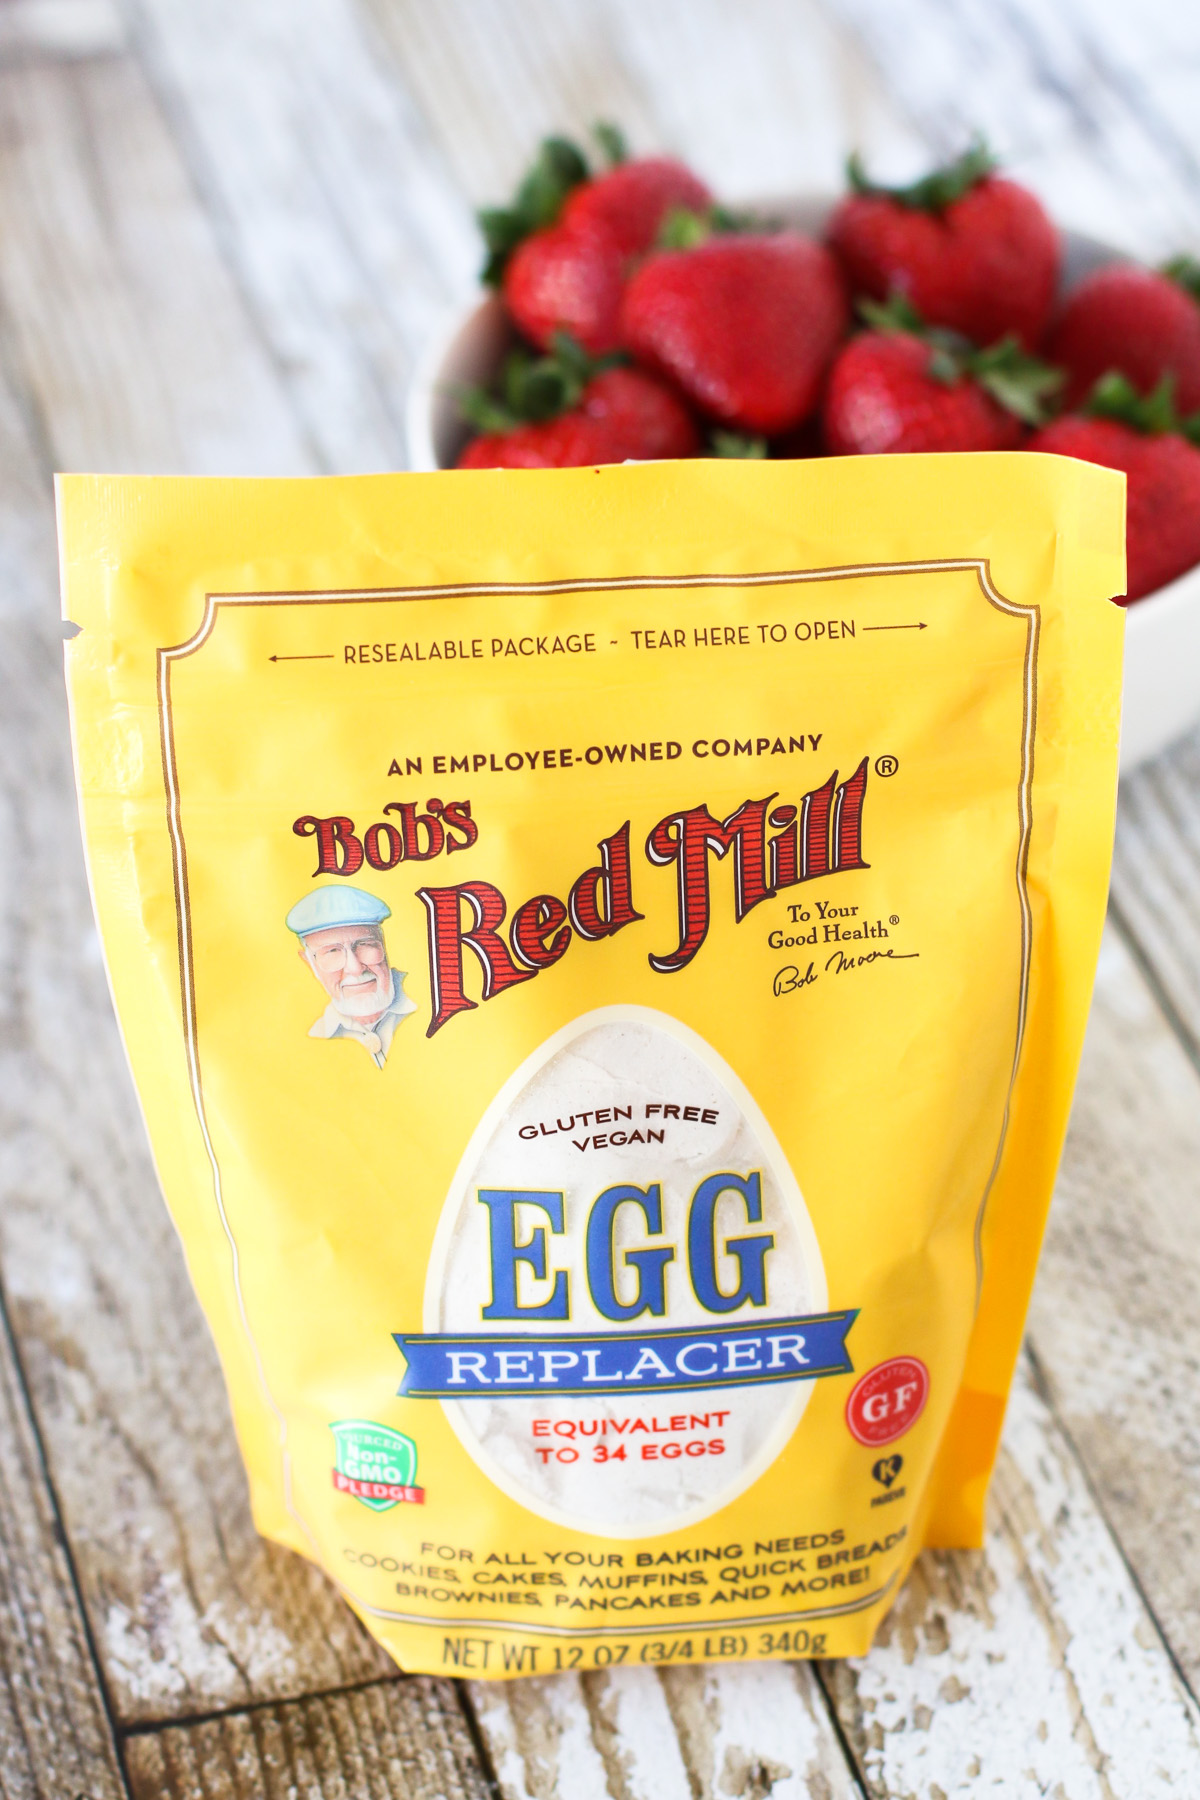 Bobs-Red-Mill-Egg-Replacer.jpg